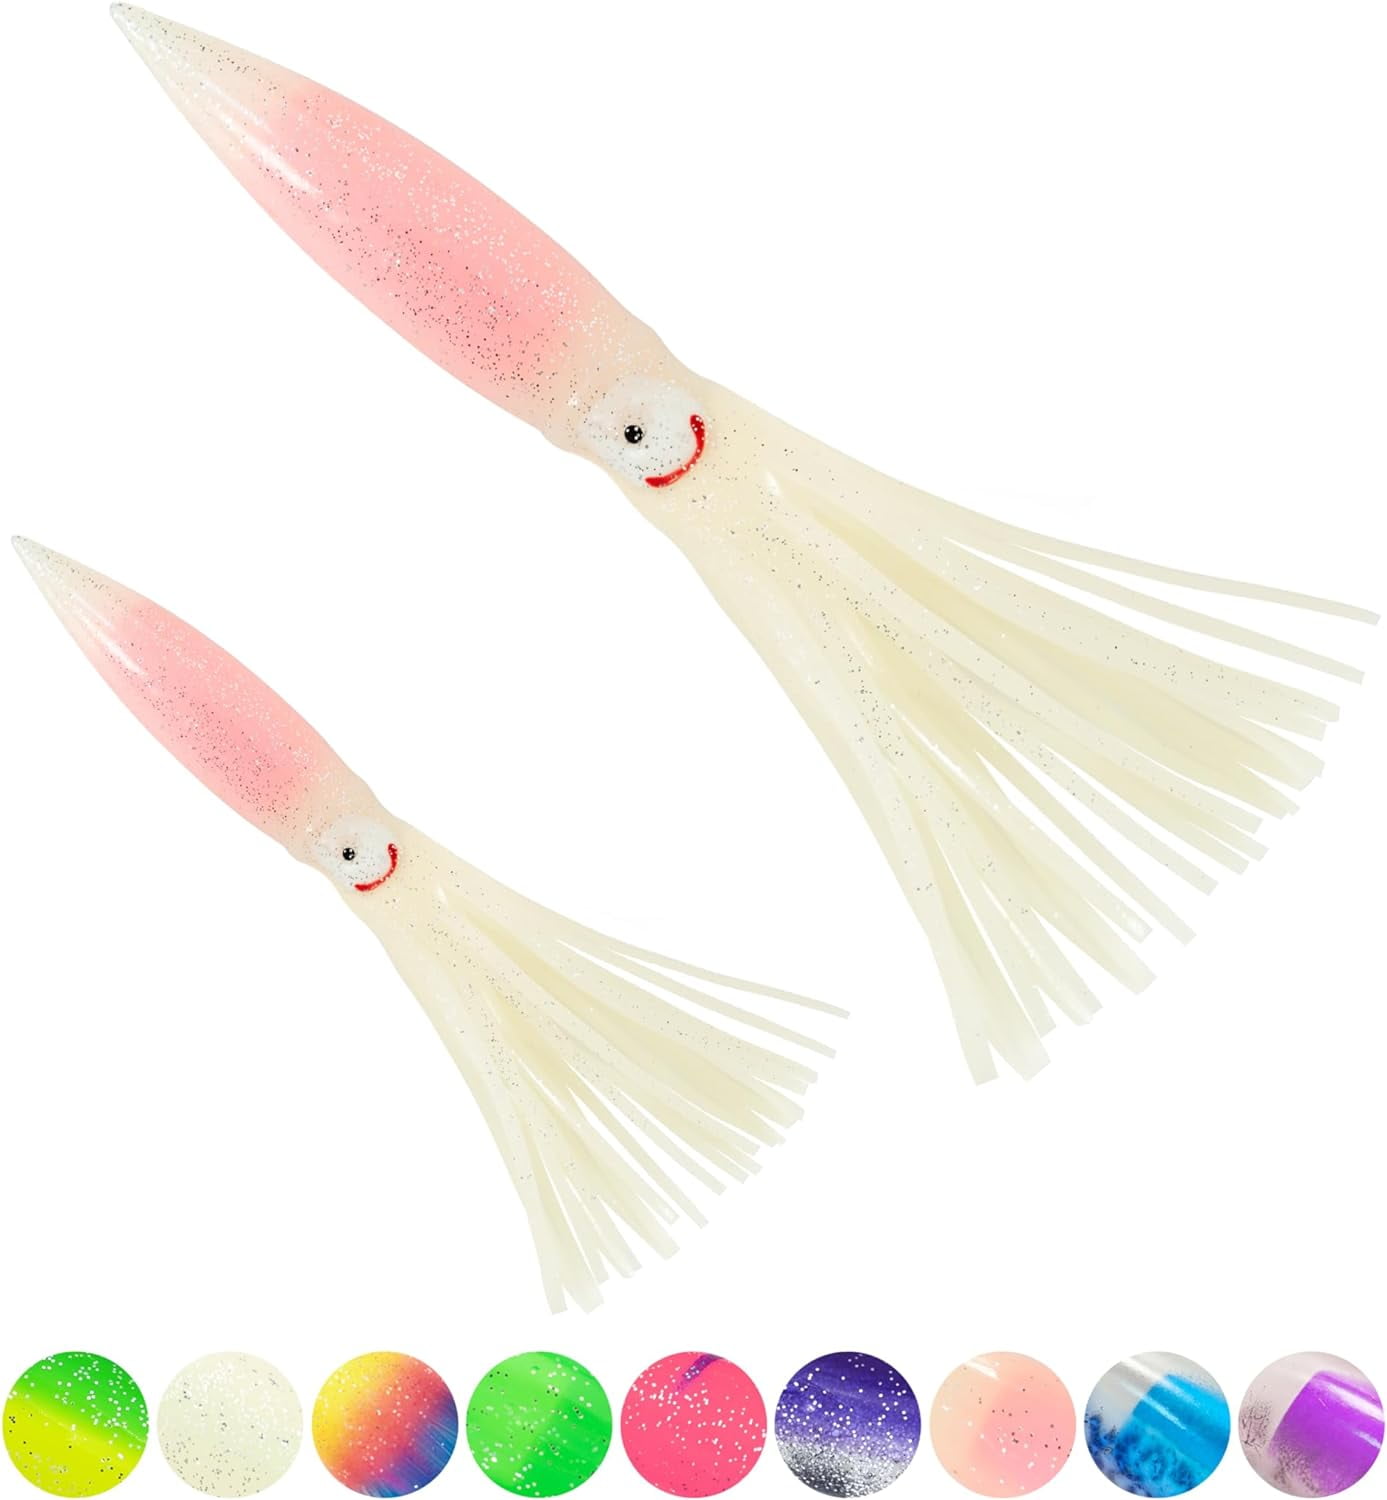 BLUEWING 10pcs Trolling Squid Skirts Fishing Saltwater with Float Inside Squid  Lures Fishing Saltwater Octopus Skirt for Tuna, Mahi, Marlin, Big Game Fish  Luminous 6in 